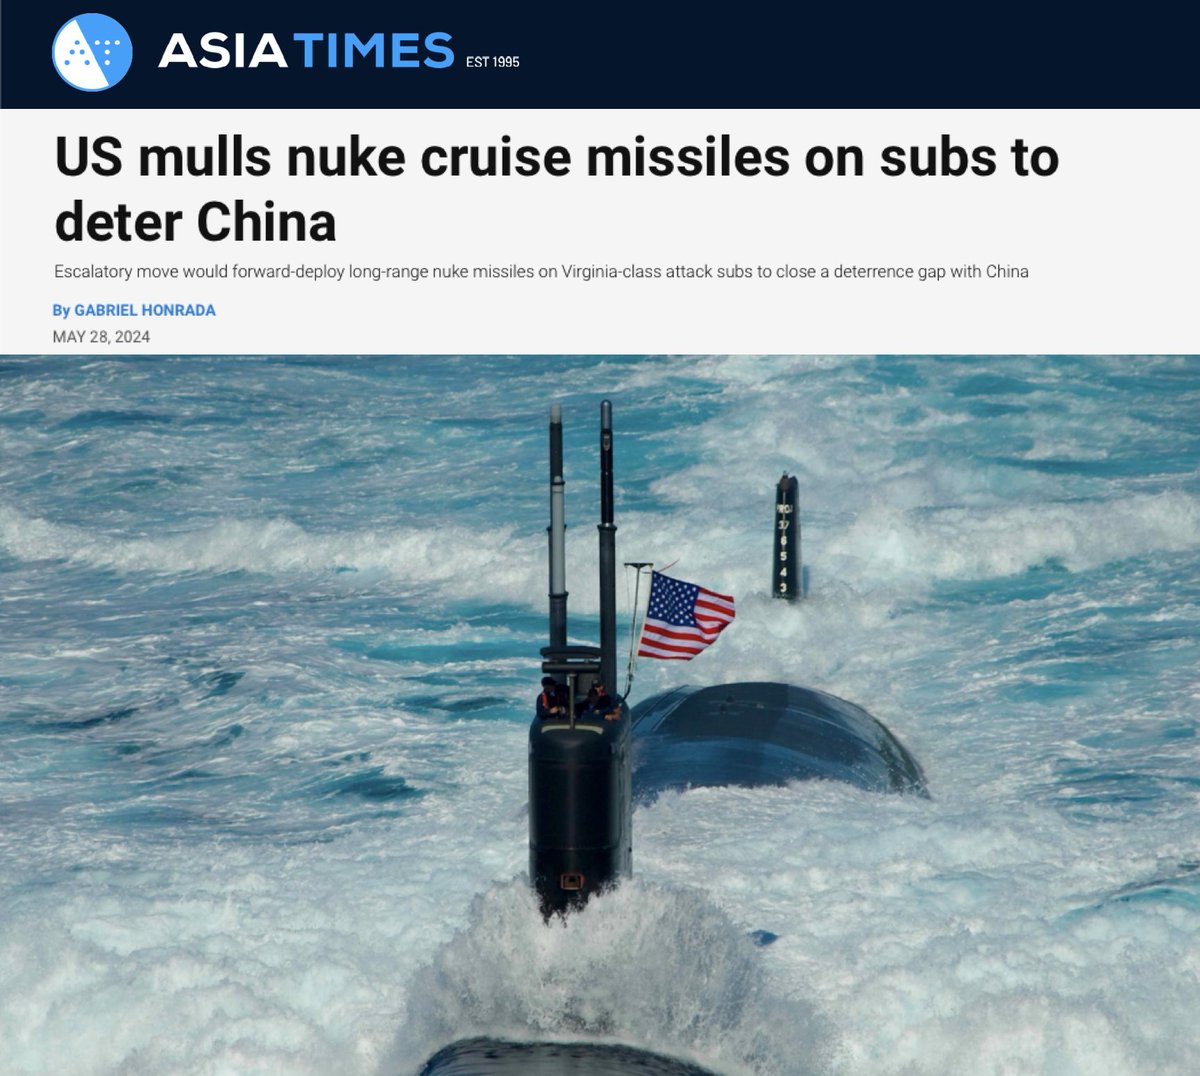 #US mulls nuke cruise missiles on subs to deter #China Escalatory move would forward-deploy long-range nuke missiles on Virginia-class attack subs to close a deterrence gap with China. The US faces a pivotal decision on whether to deploy nuclear-armed cruise missiles on